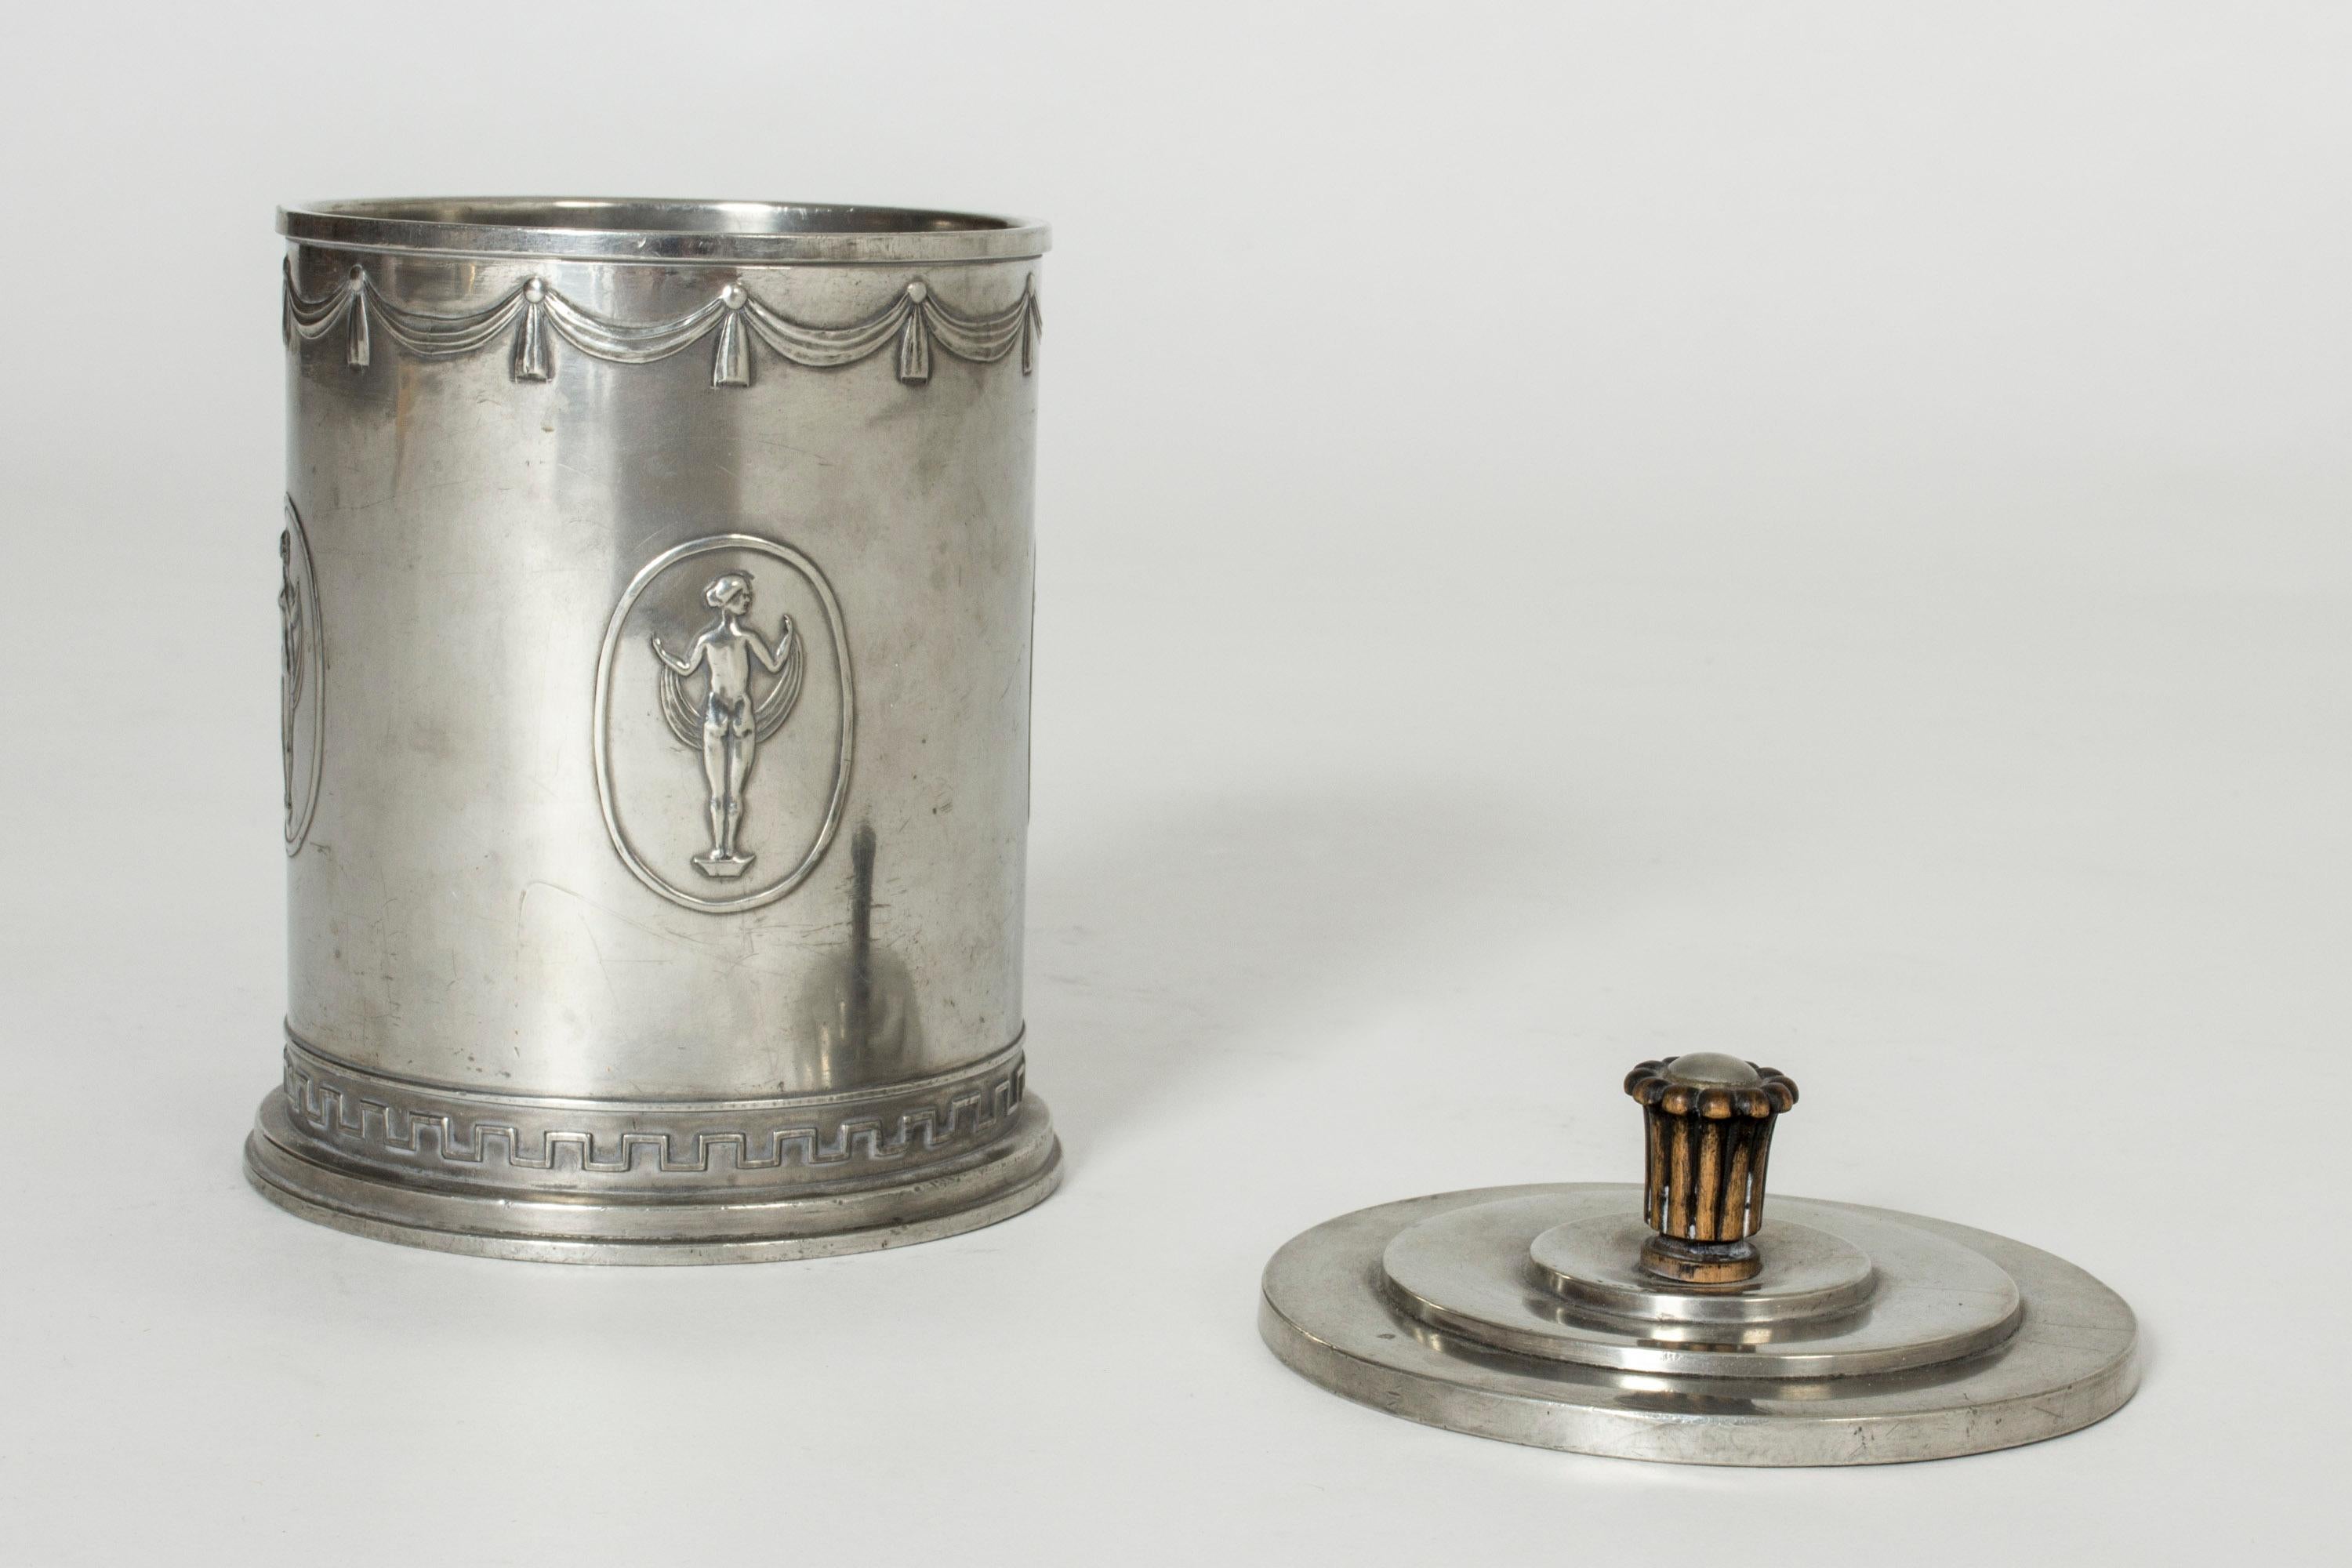 Rare, elegant pewter jar from the Swedish Grace period, made by Schreuder & Olsson. Decor of woman in different poses around the body and a Classic meandering pattern around the base. Sculpted wooden knob on the lid.